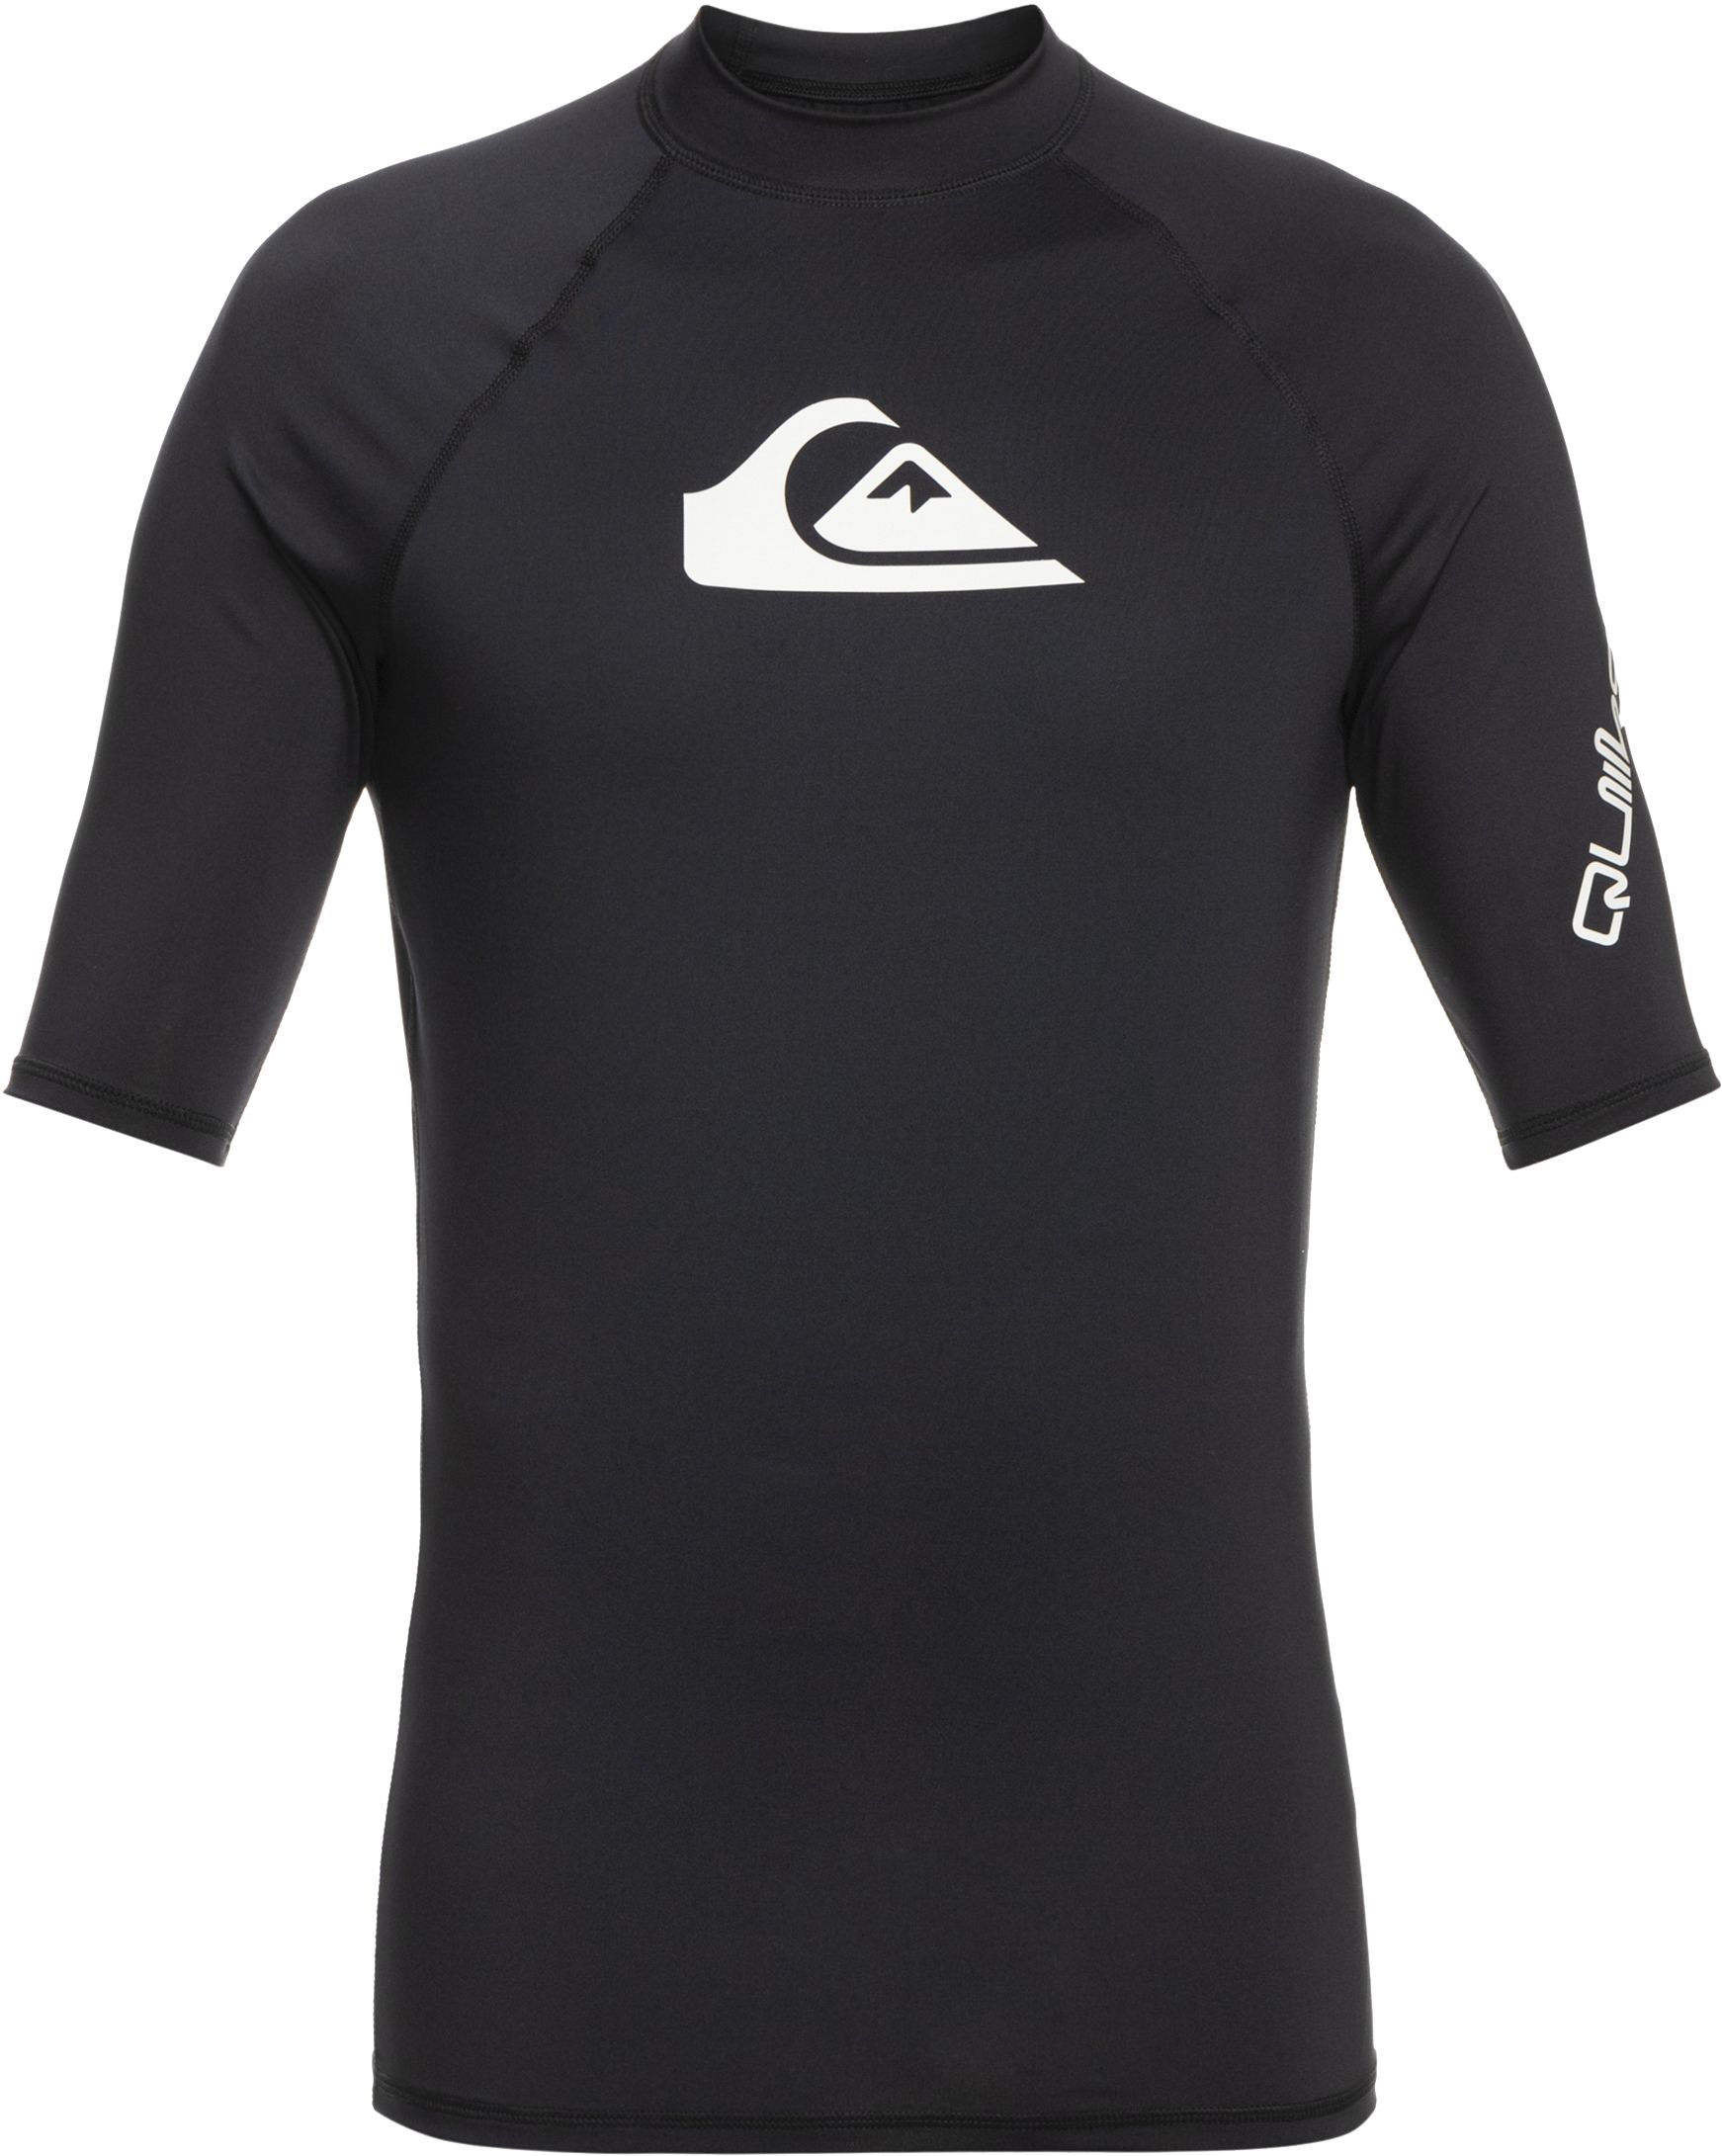 QUIKSILVER, J ALL TIME SS YOUTH